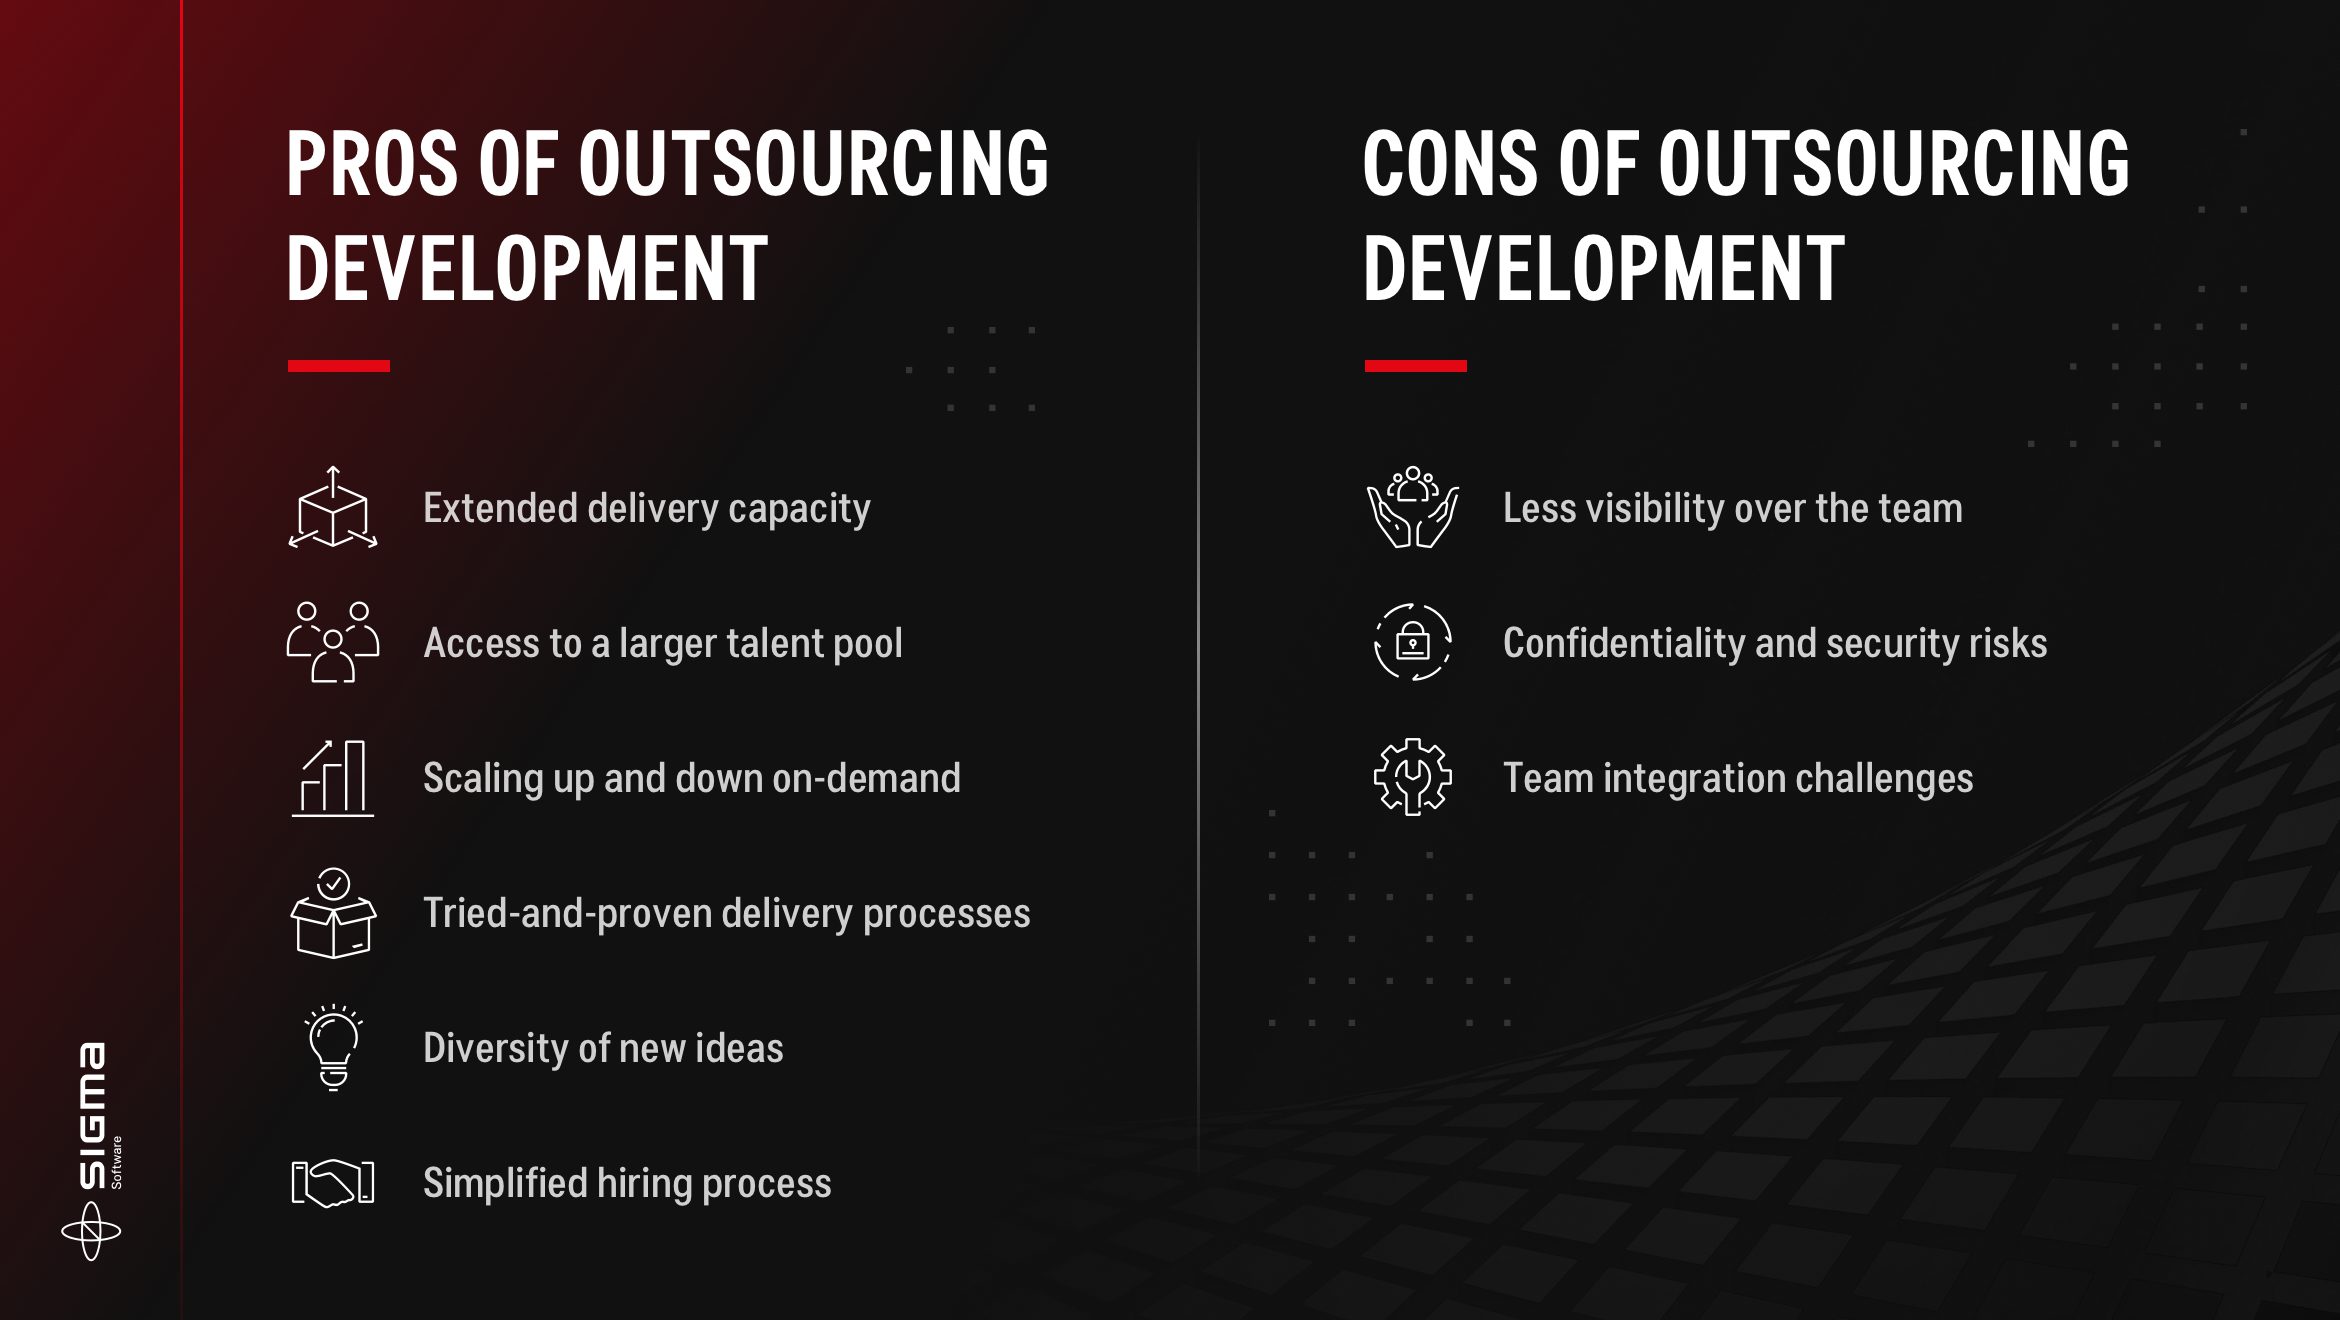 Pros and cons of outsourcing development